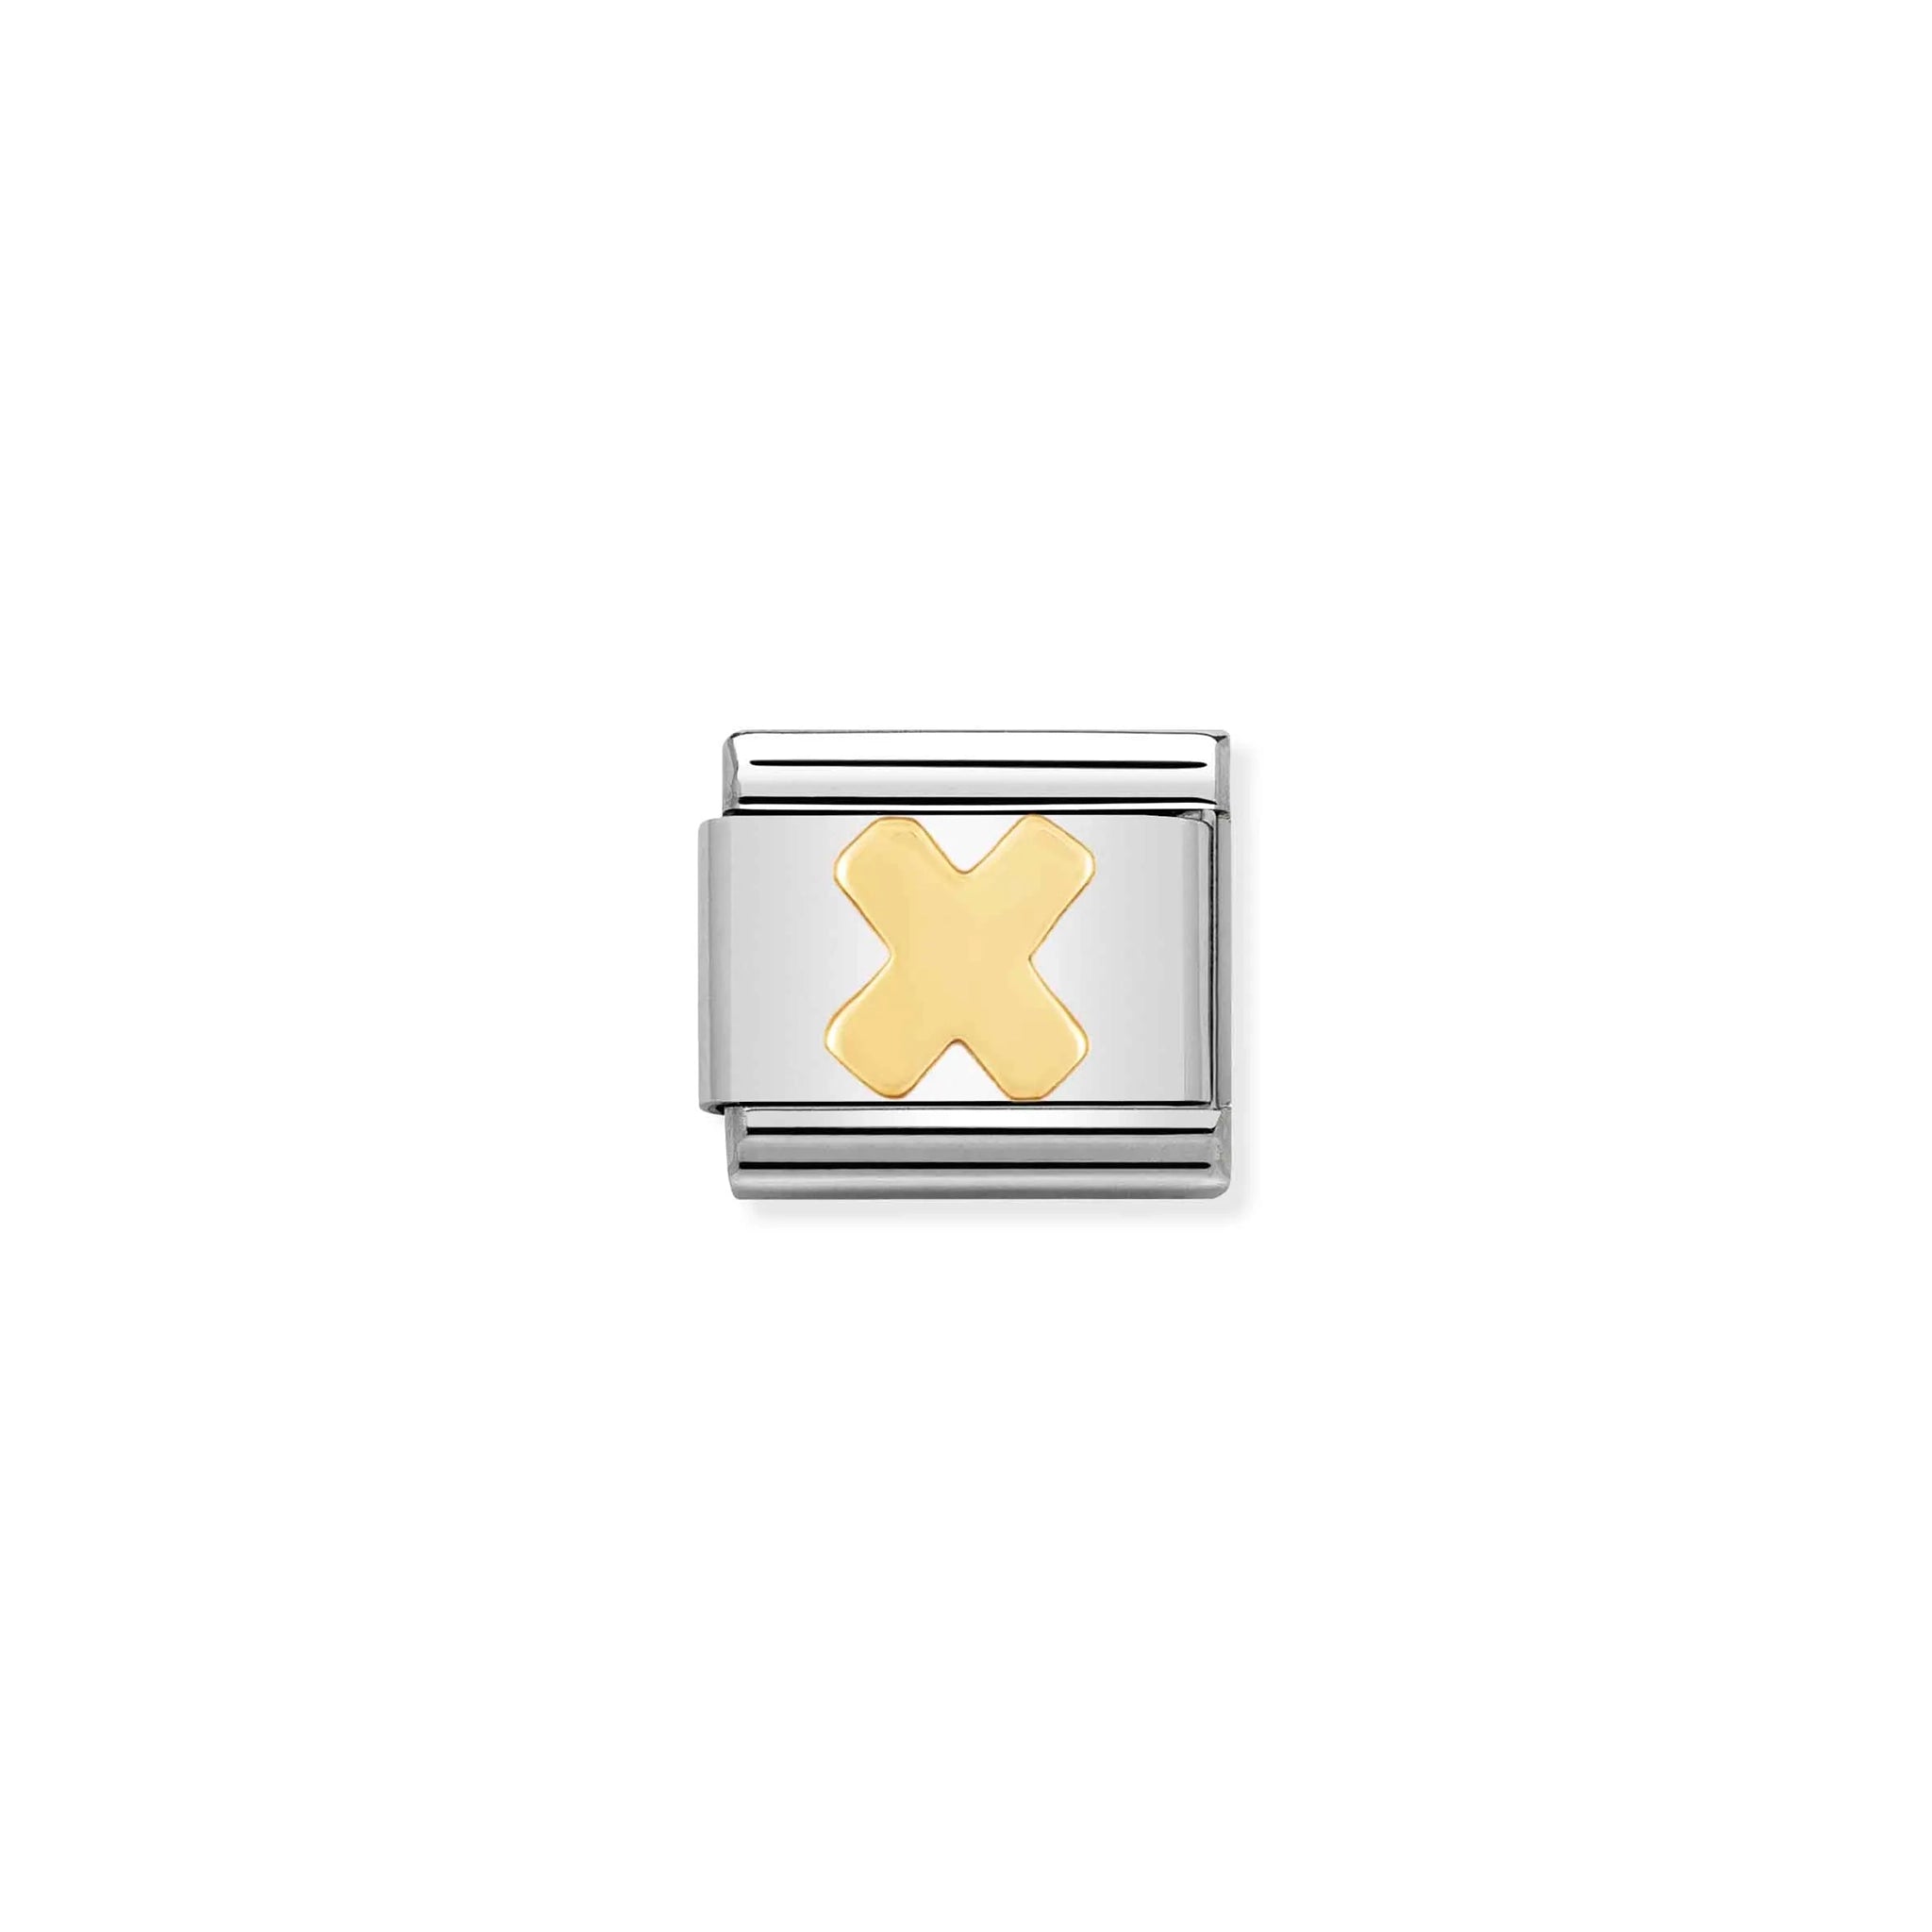 A Nomination charm featuring a gold letter 'X'